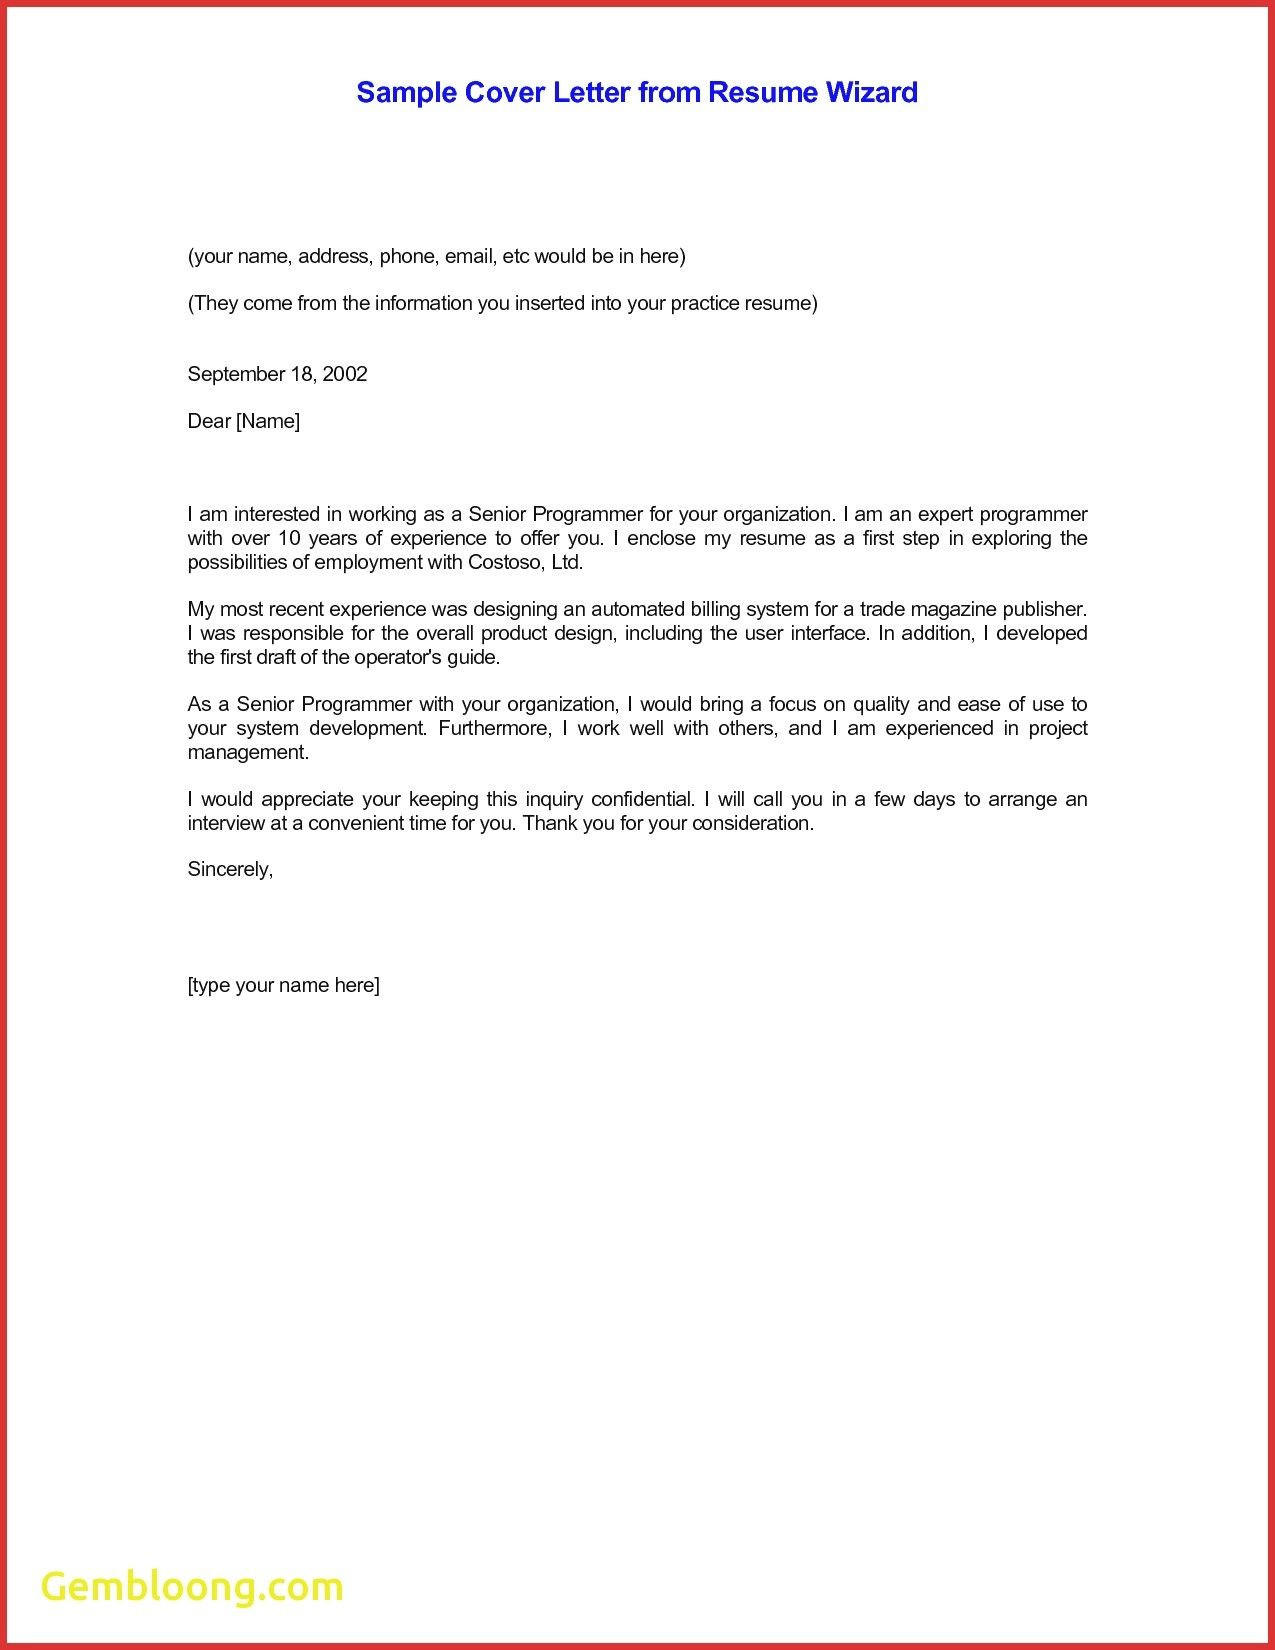 Sample Email to Send Cover Letter and Resume Email Cv Cover Letter Template – Resume format Cover Letter for …